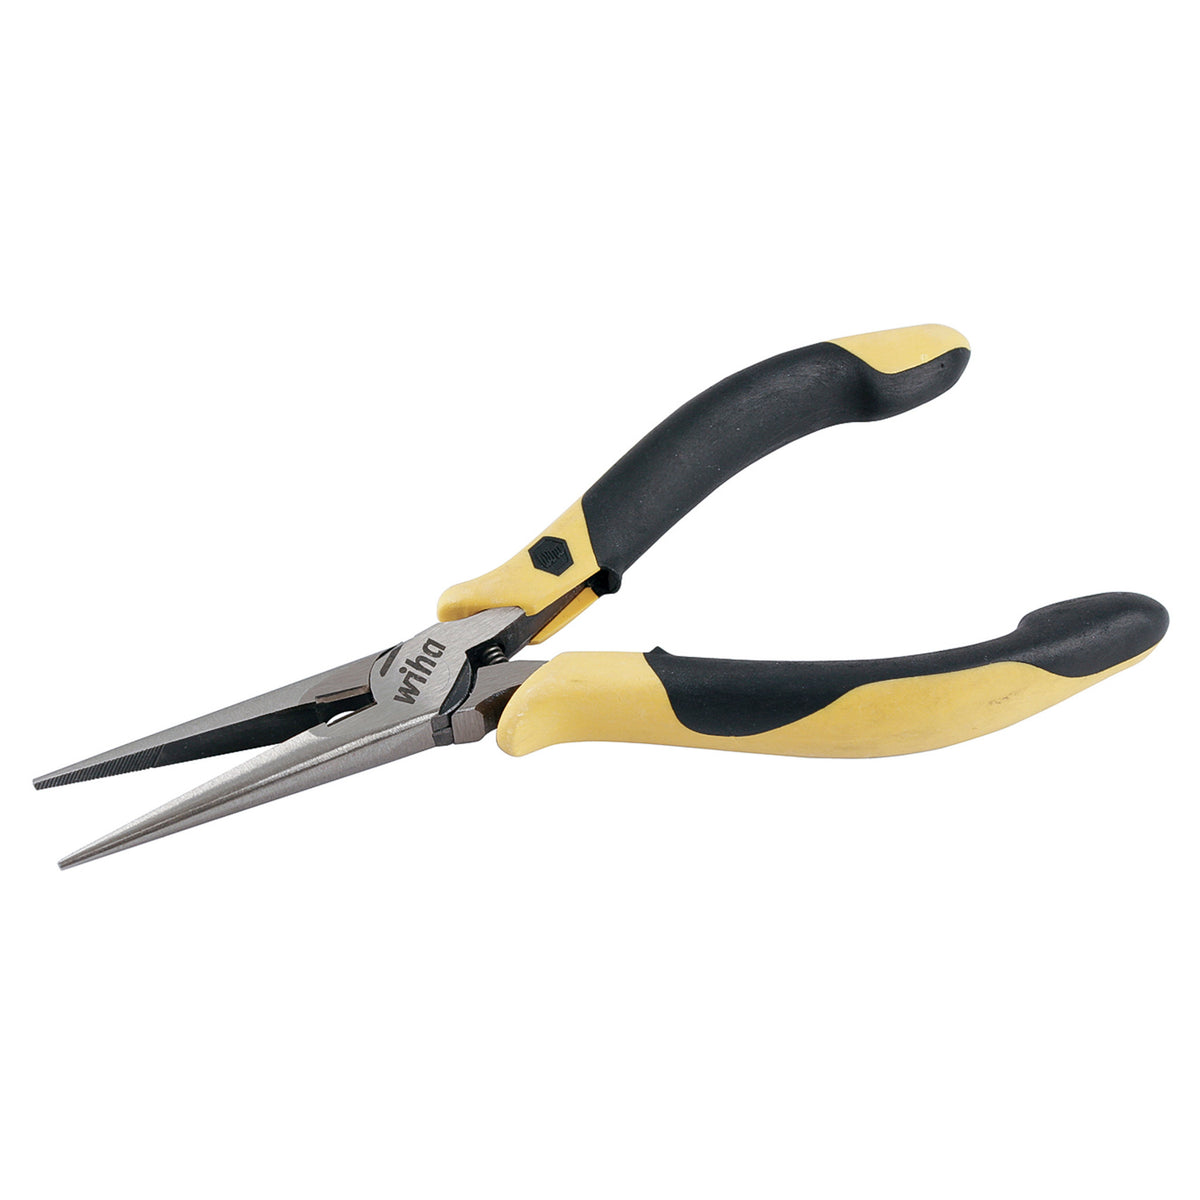 Wiha Z 36 0 01 Precision Mechanics Nose Pliers with Side Cutter and Spring 160mm Basic Mechanics Nose Pliers